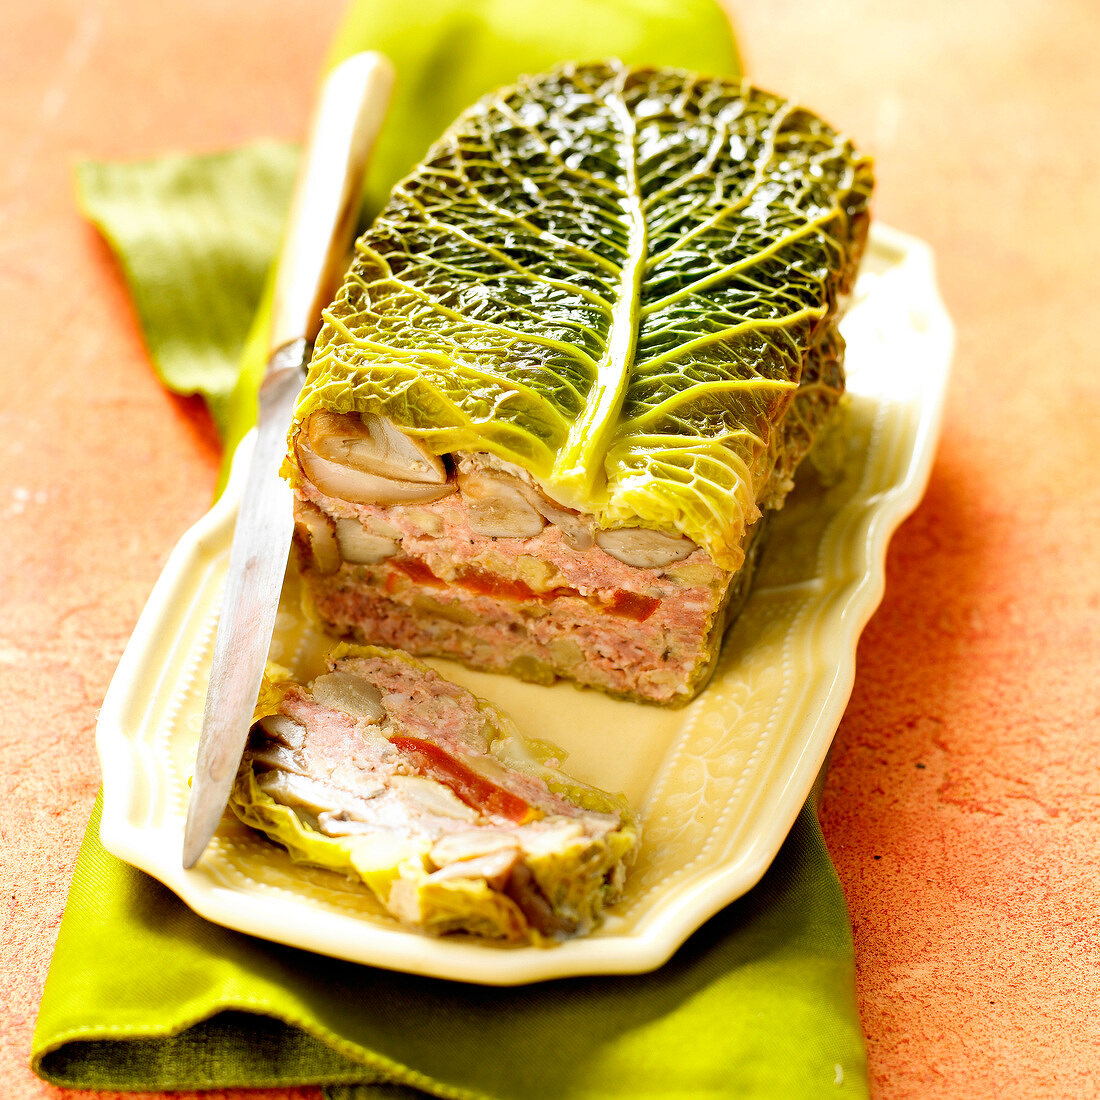 Rabbit and vegetable terrine wrapped in cabbage leaves